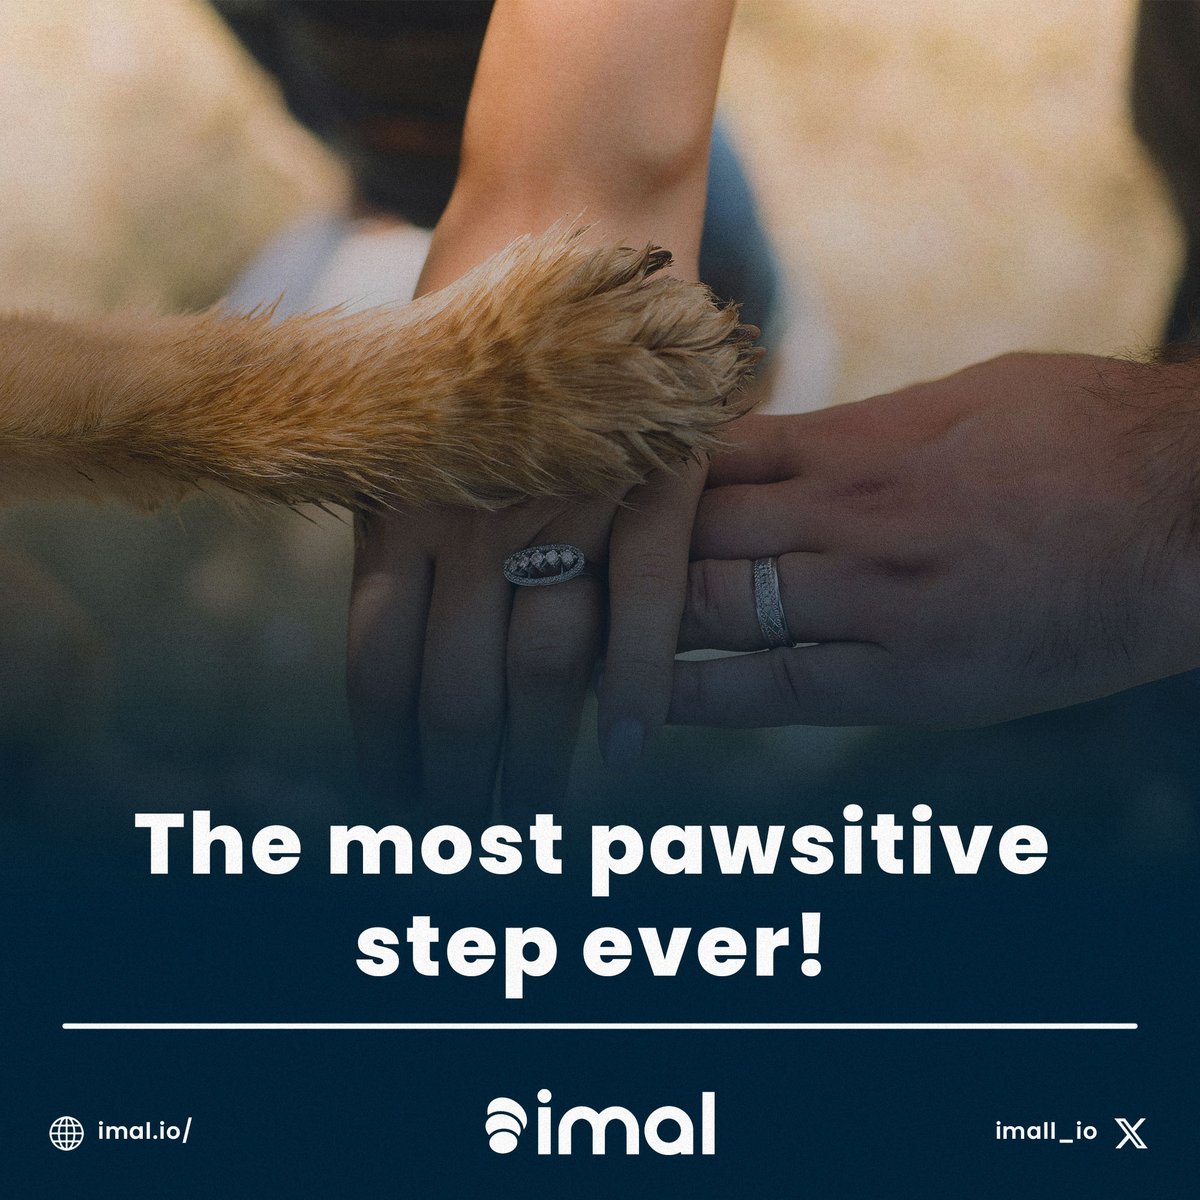 High five with your furry friend!